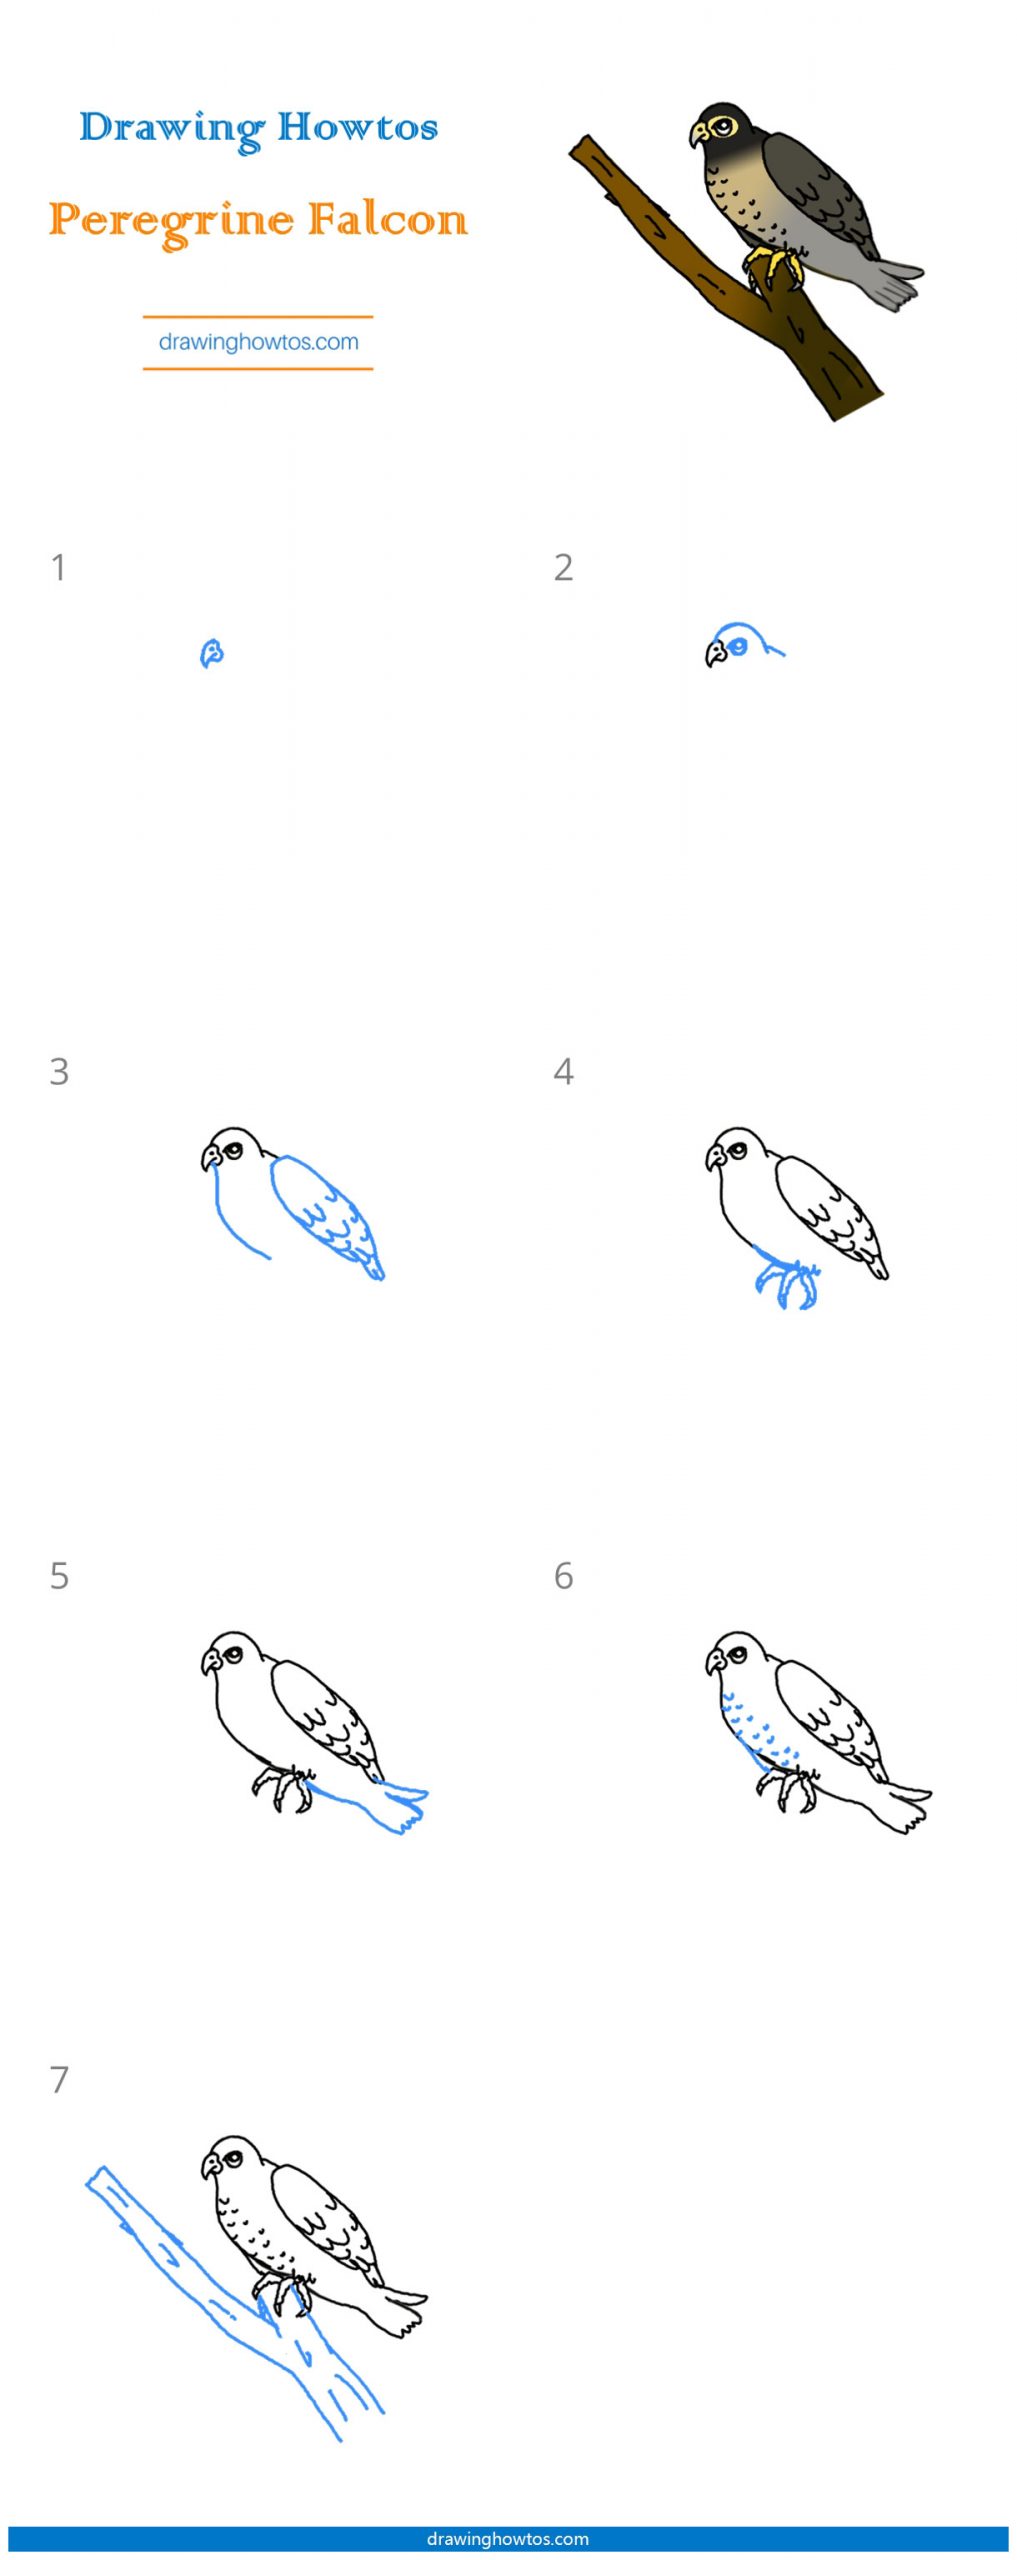 How to Draw a Peregrine Falcon Step by Step